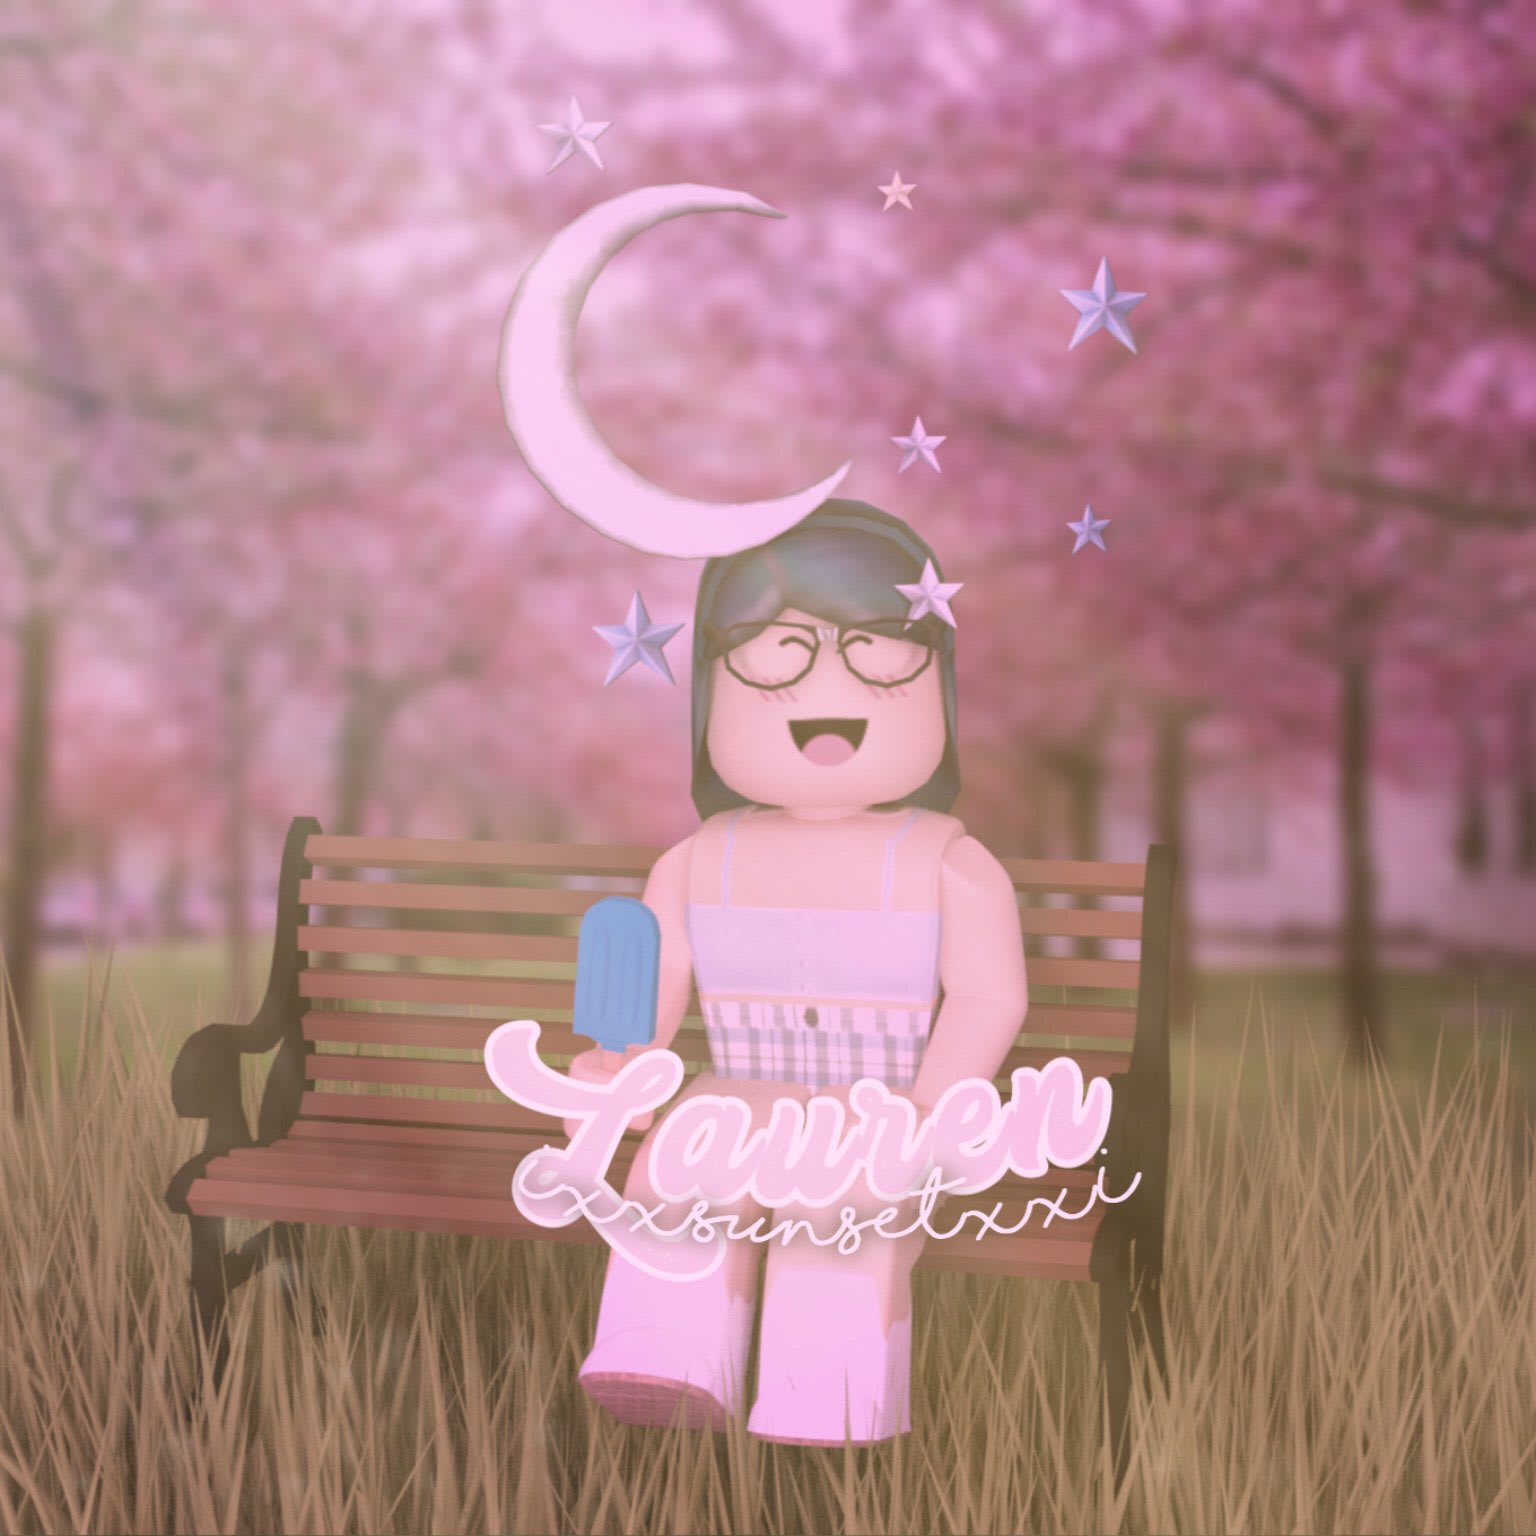 Make You A Roblox Gfx Roblox Thumbnail Or Intro By Giselleks17 - aesthetic pink quote roblox